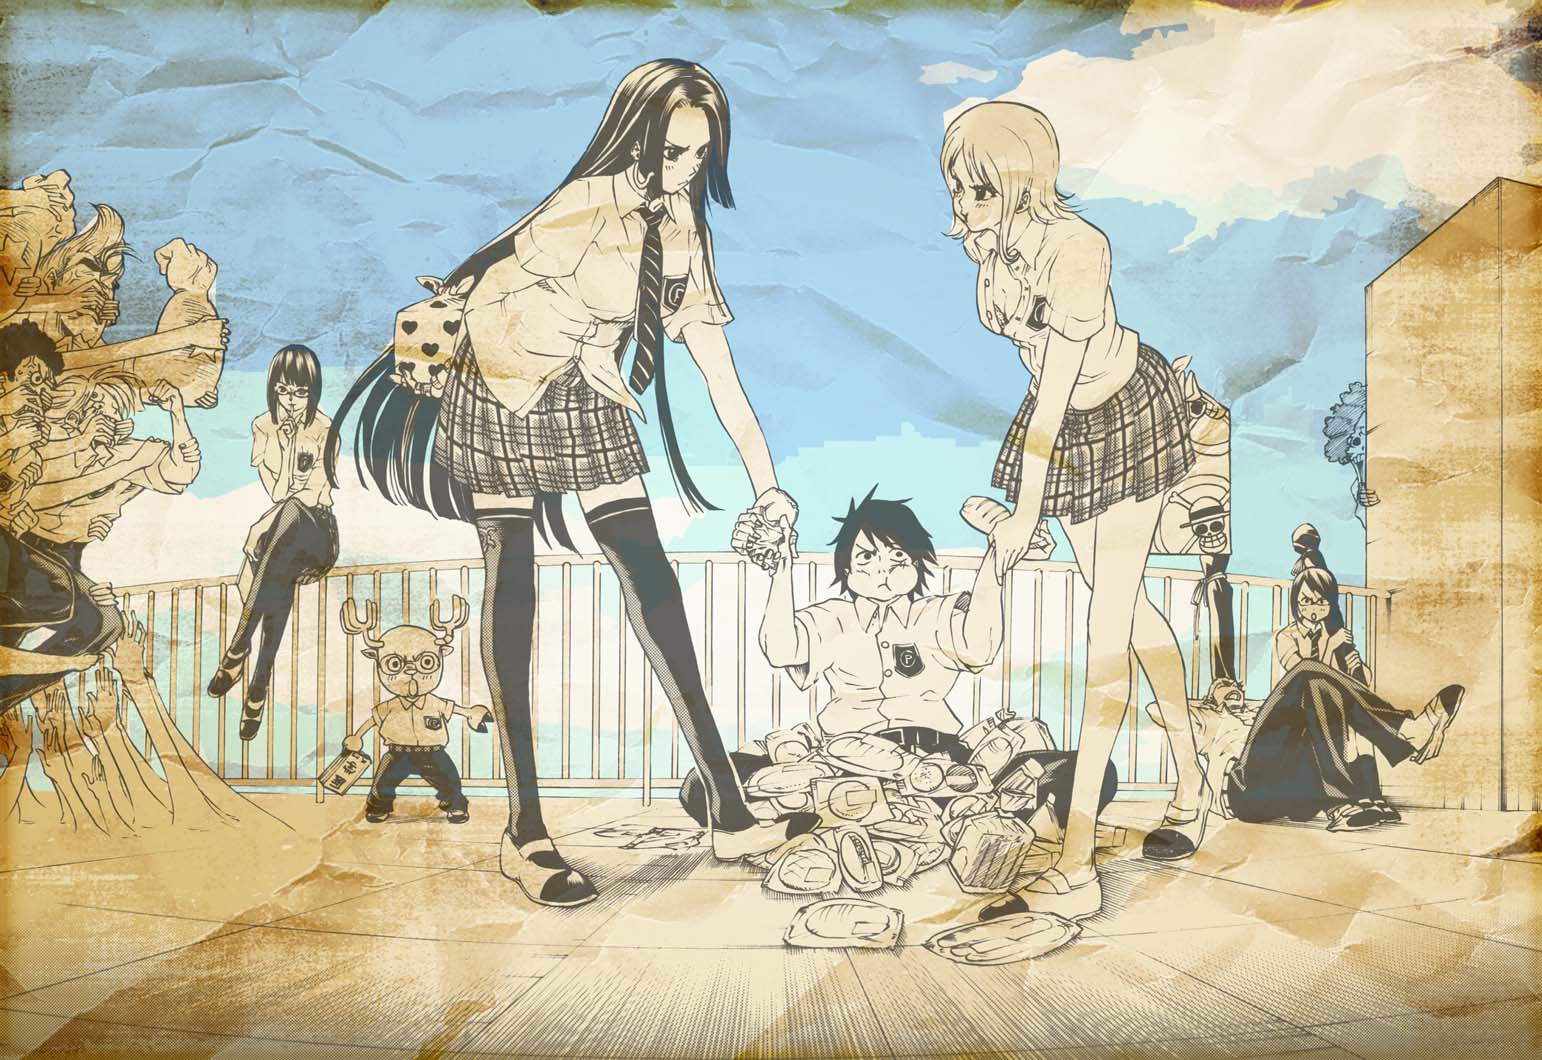 One Piece characters gathered together against a vibrant backdrop.